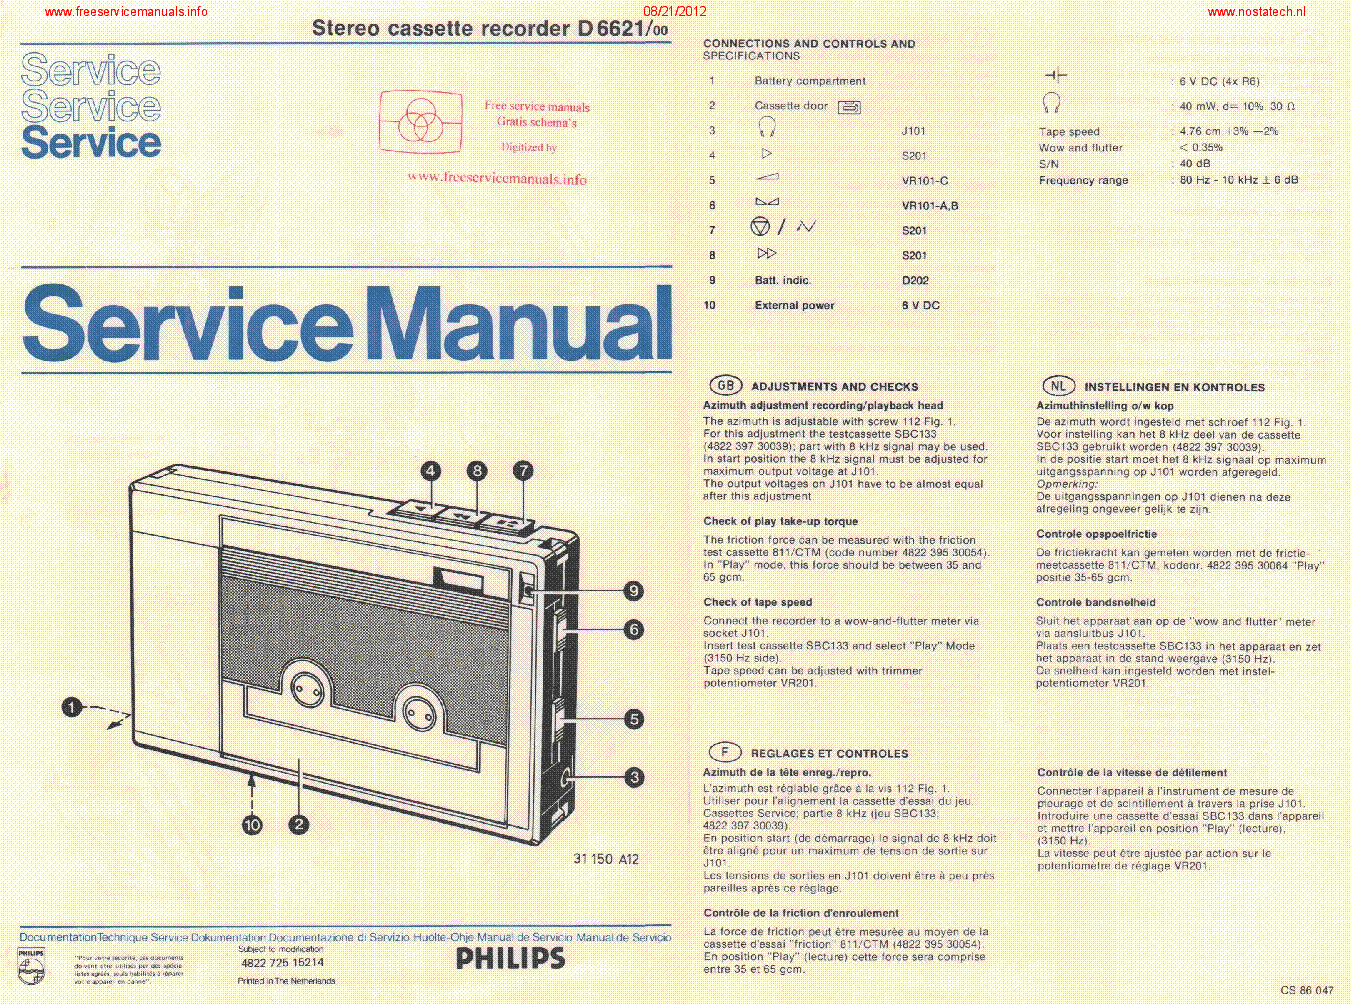 PHILIPS D 6621 service manual (1st page)